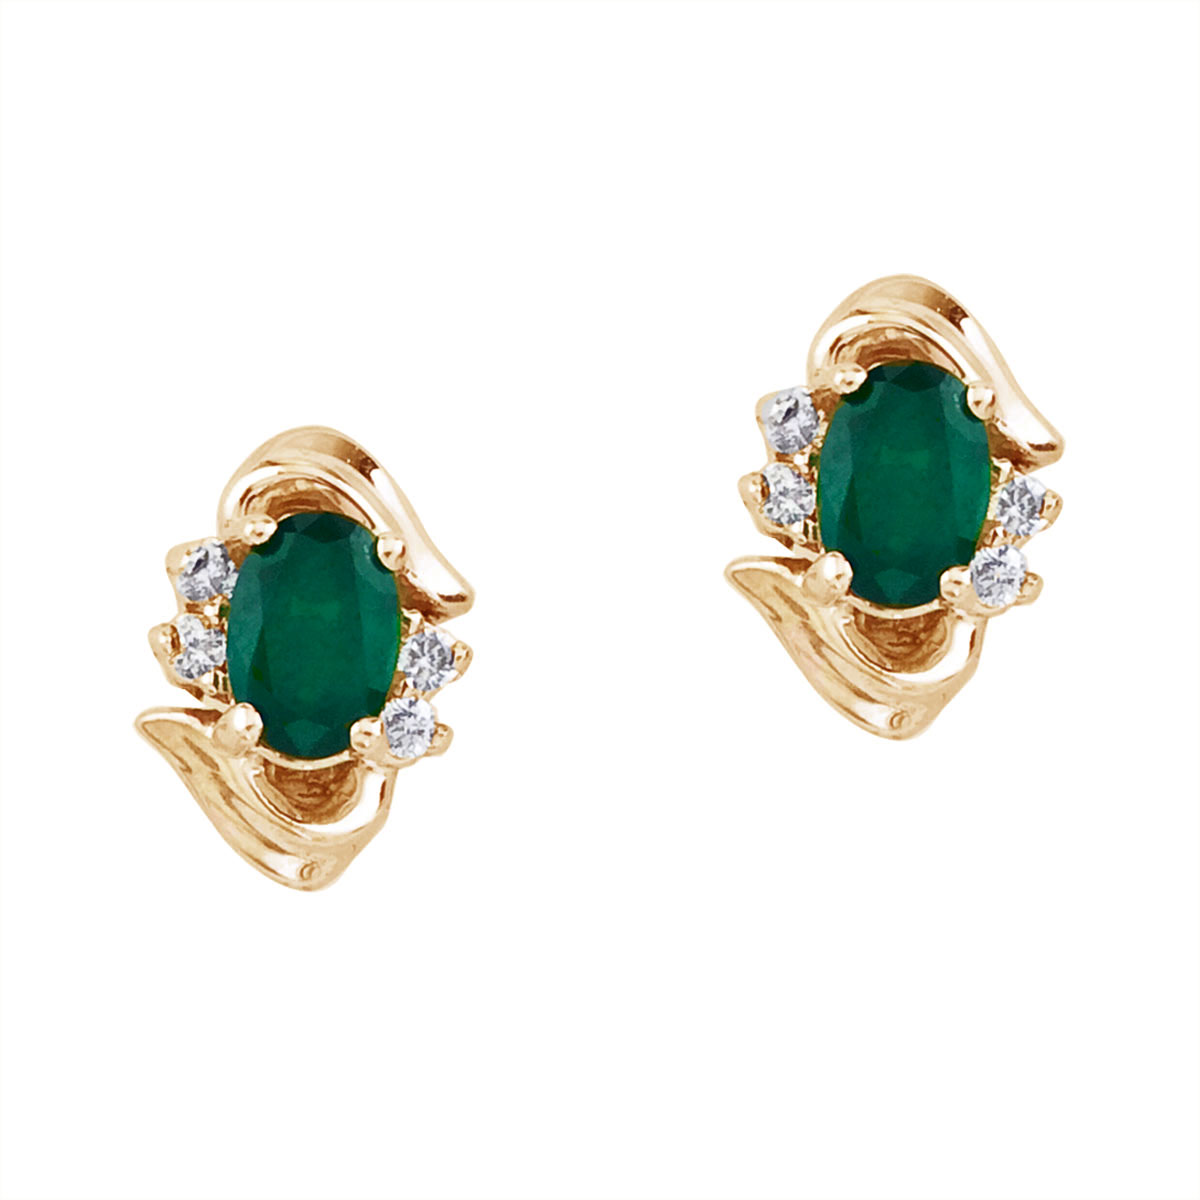 Stunning 14k yellow gold and emerald earrings. Featuring natural 6x4 mm oval emeralds and .11 tot...